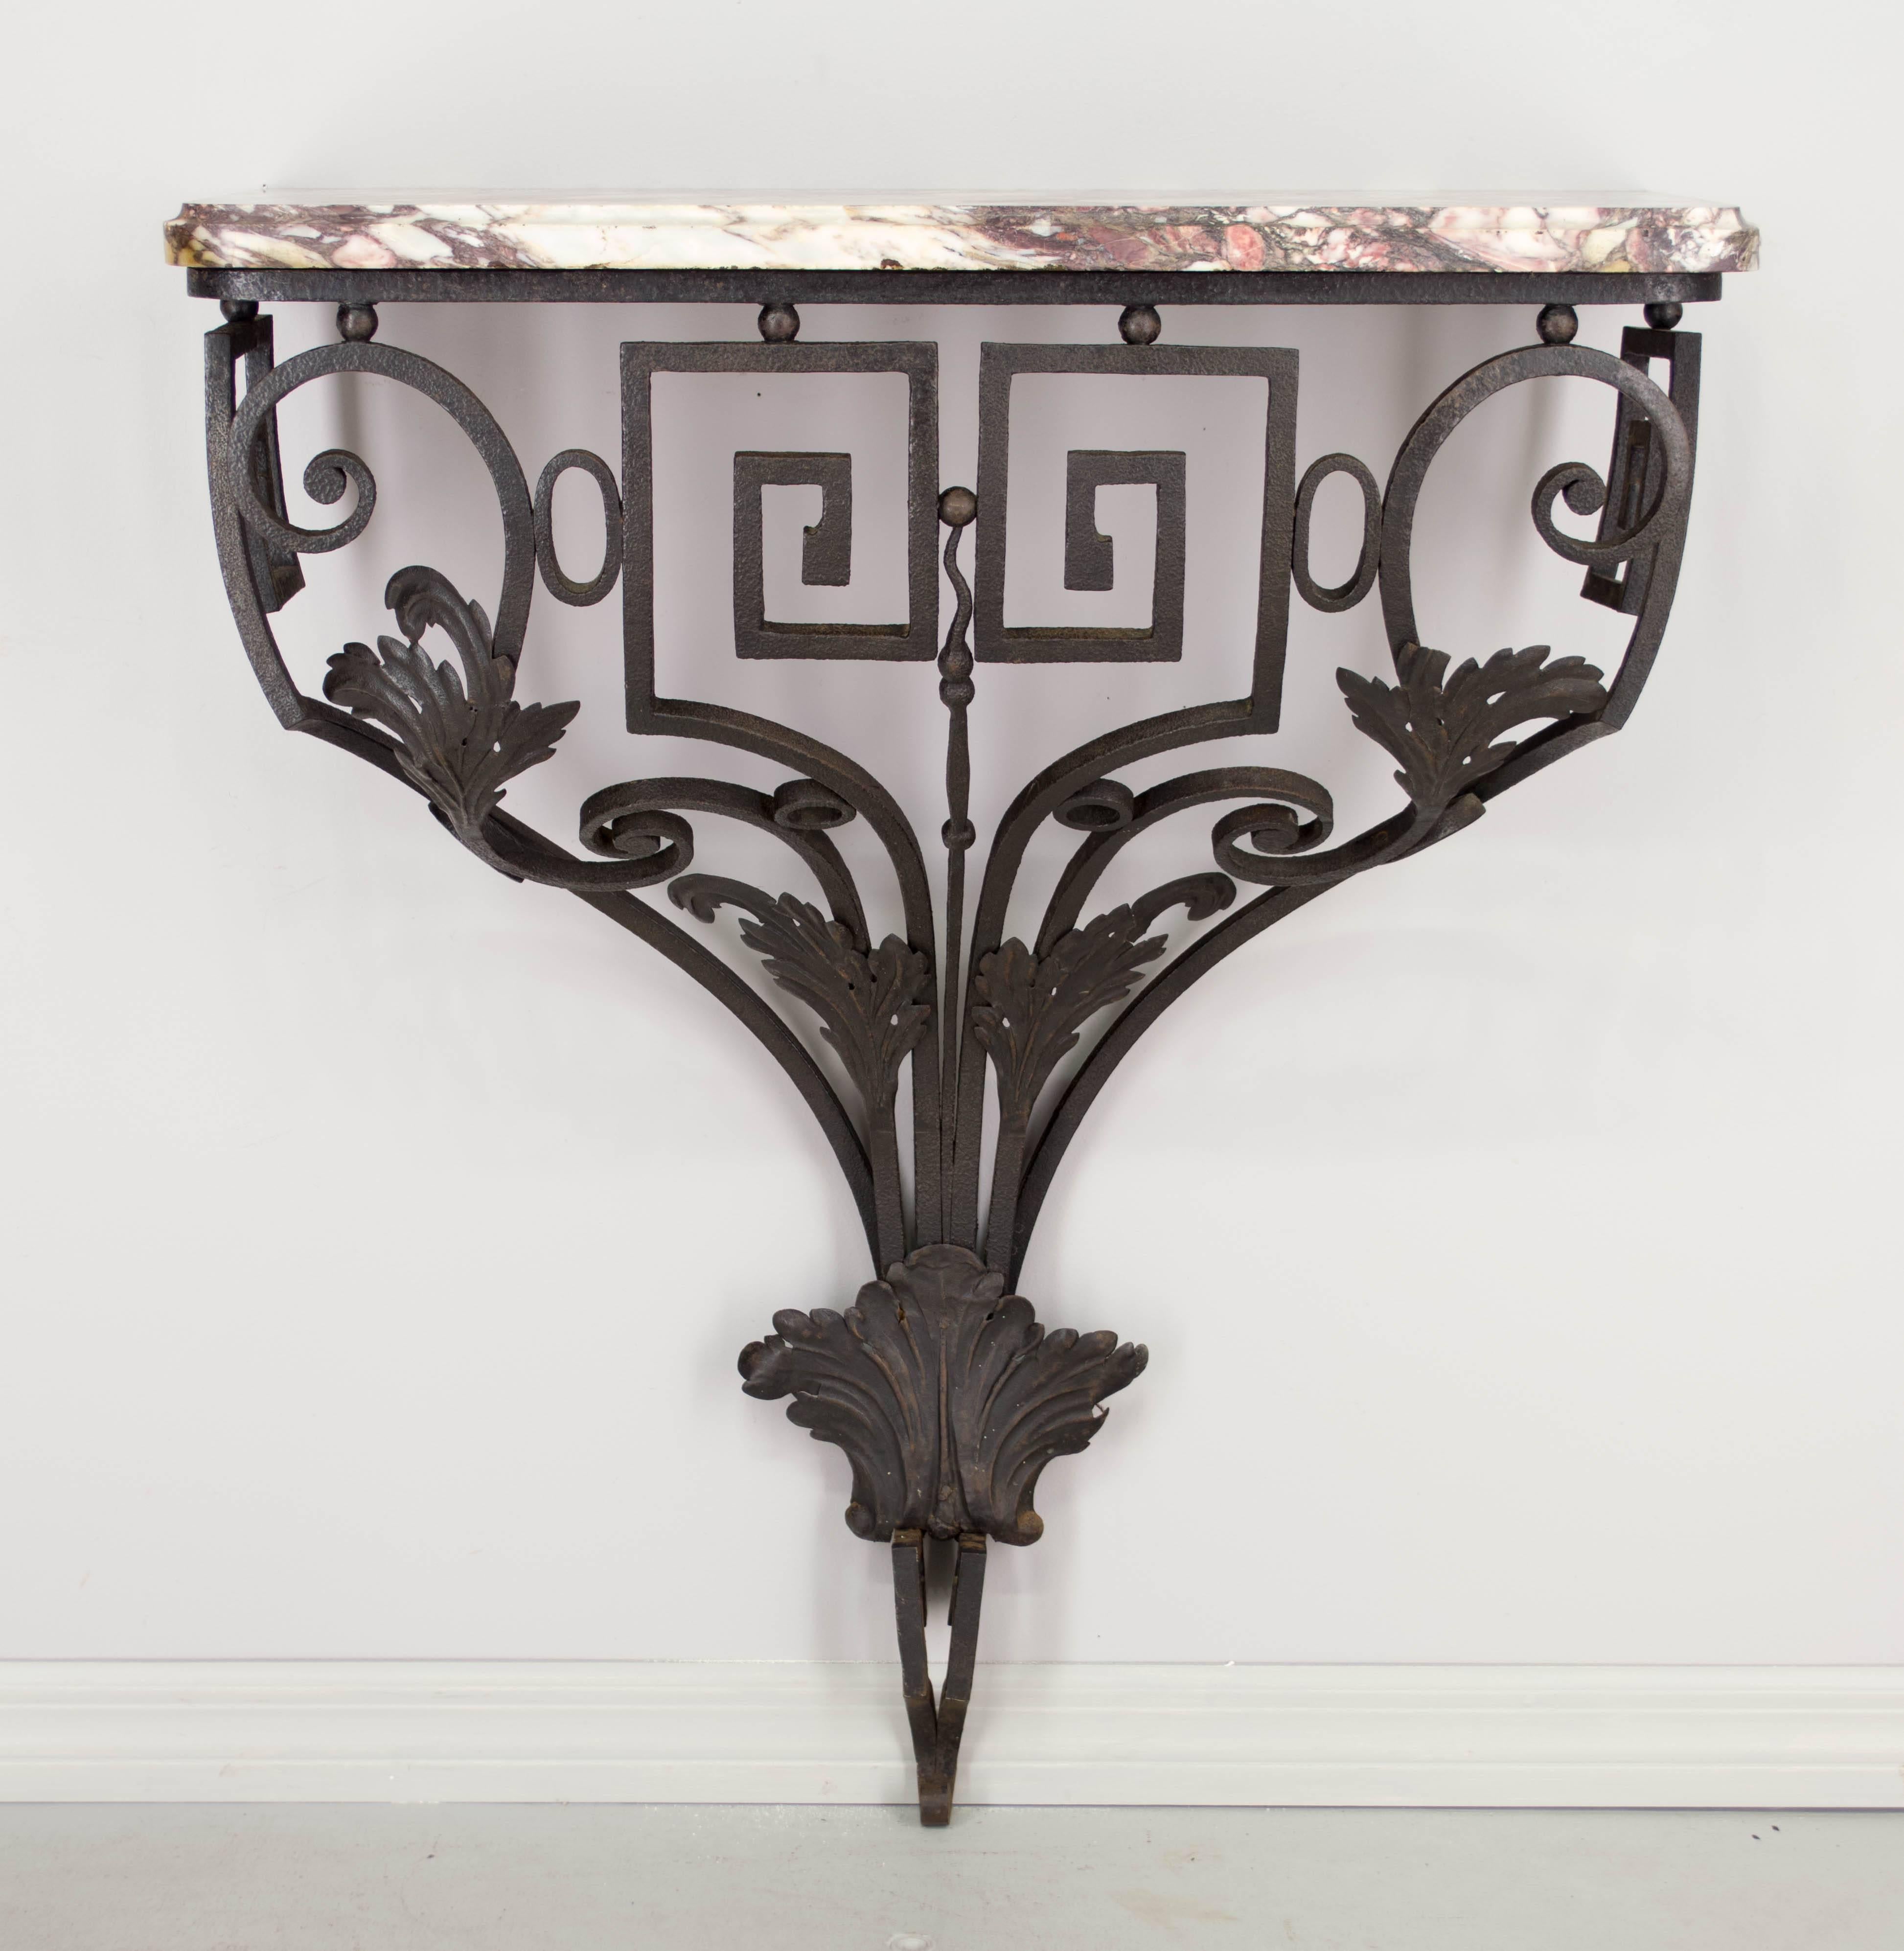  A Louis XVI wrought iron console with marble top. Classic Greek key design with scrolls and acanthus leaves. Beautiful color marble with burgundy and grey veining. Requires two screws to be fastened to the wall.  All Original. Please refer to